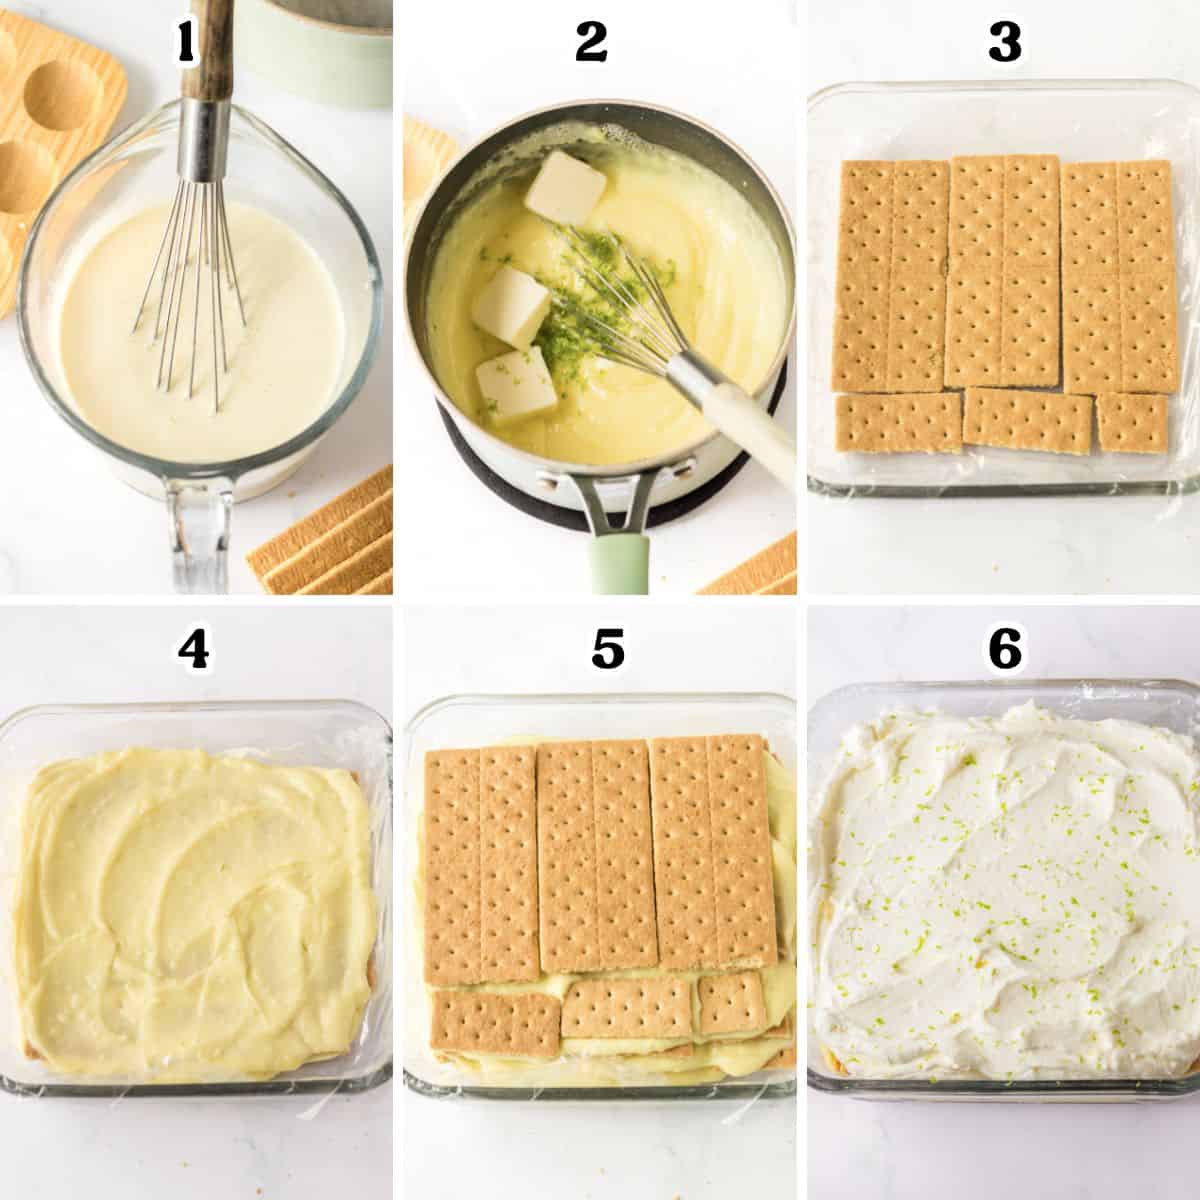 6 image collage of steps to make key lime cake. 1: whisk egg yolks and cream, 2: lime zest and butter added to pot of custard mixture, 3. layer graham crackers in bottom of dish in a single layer, 4: top with key lime custard, 5: add layer of graham crackers, 6: top with homemade whipped topping.